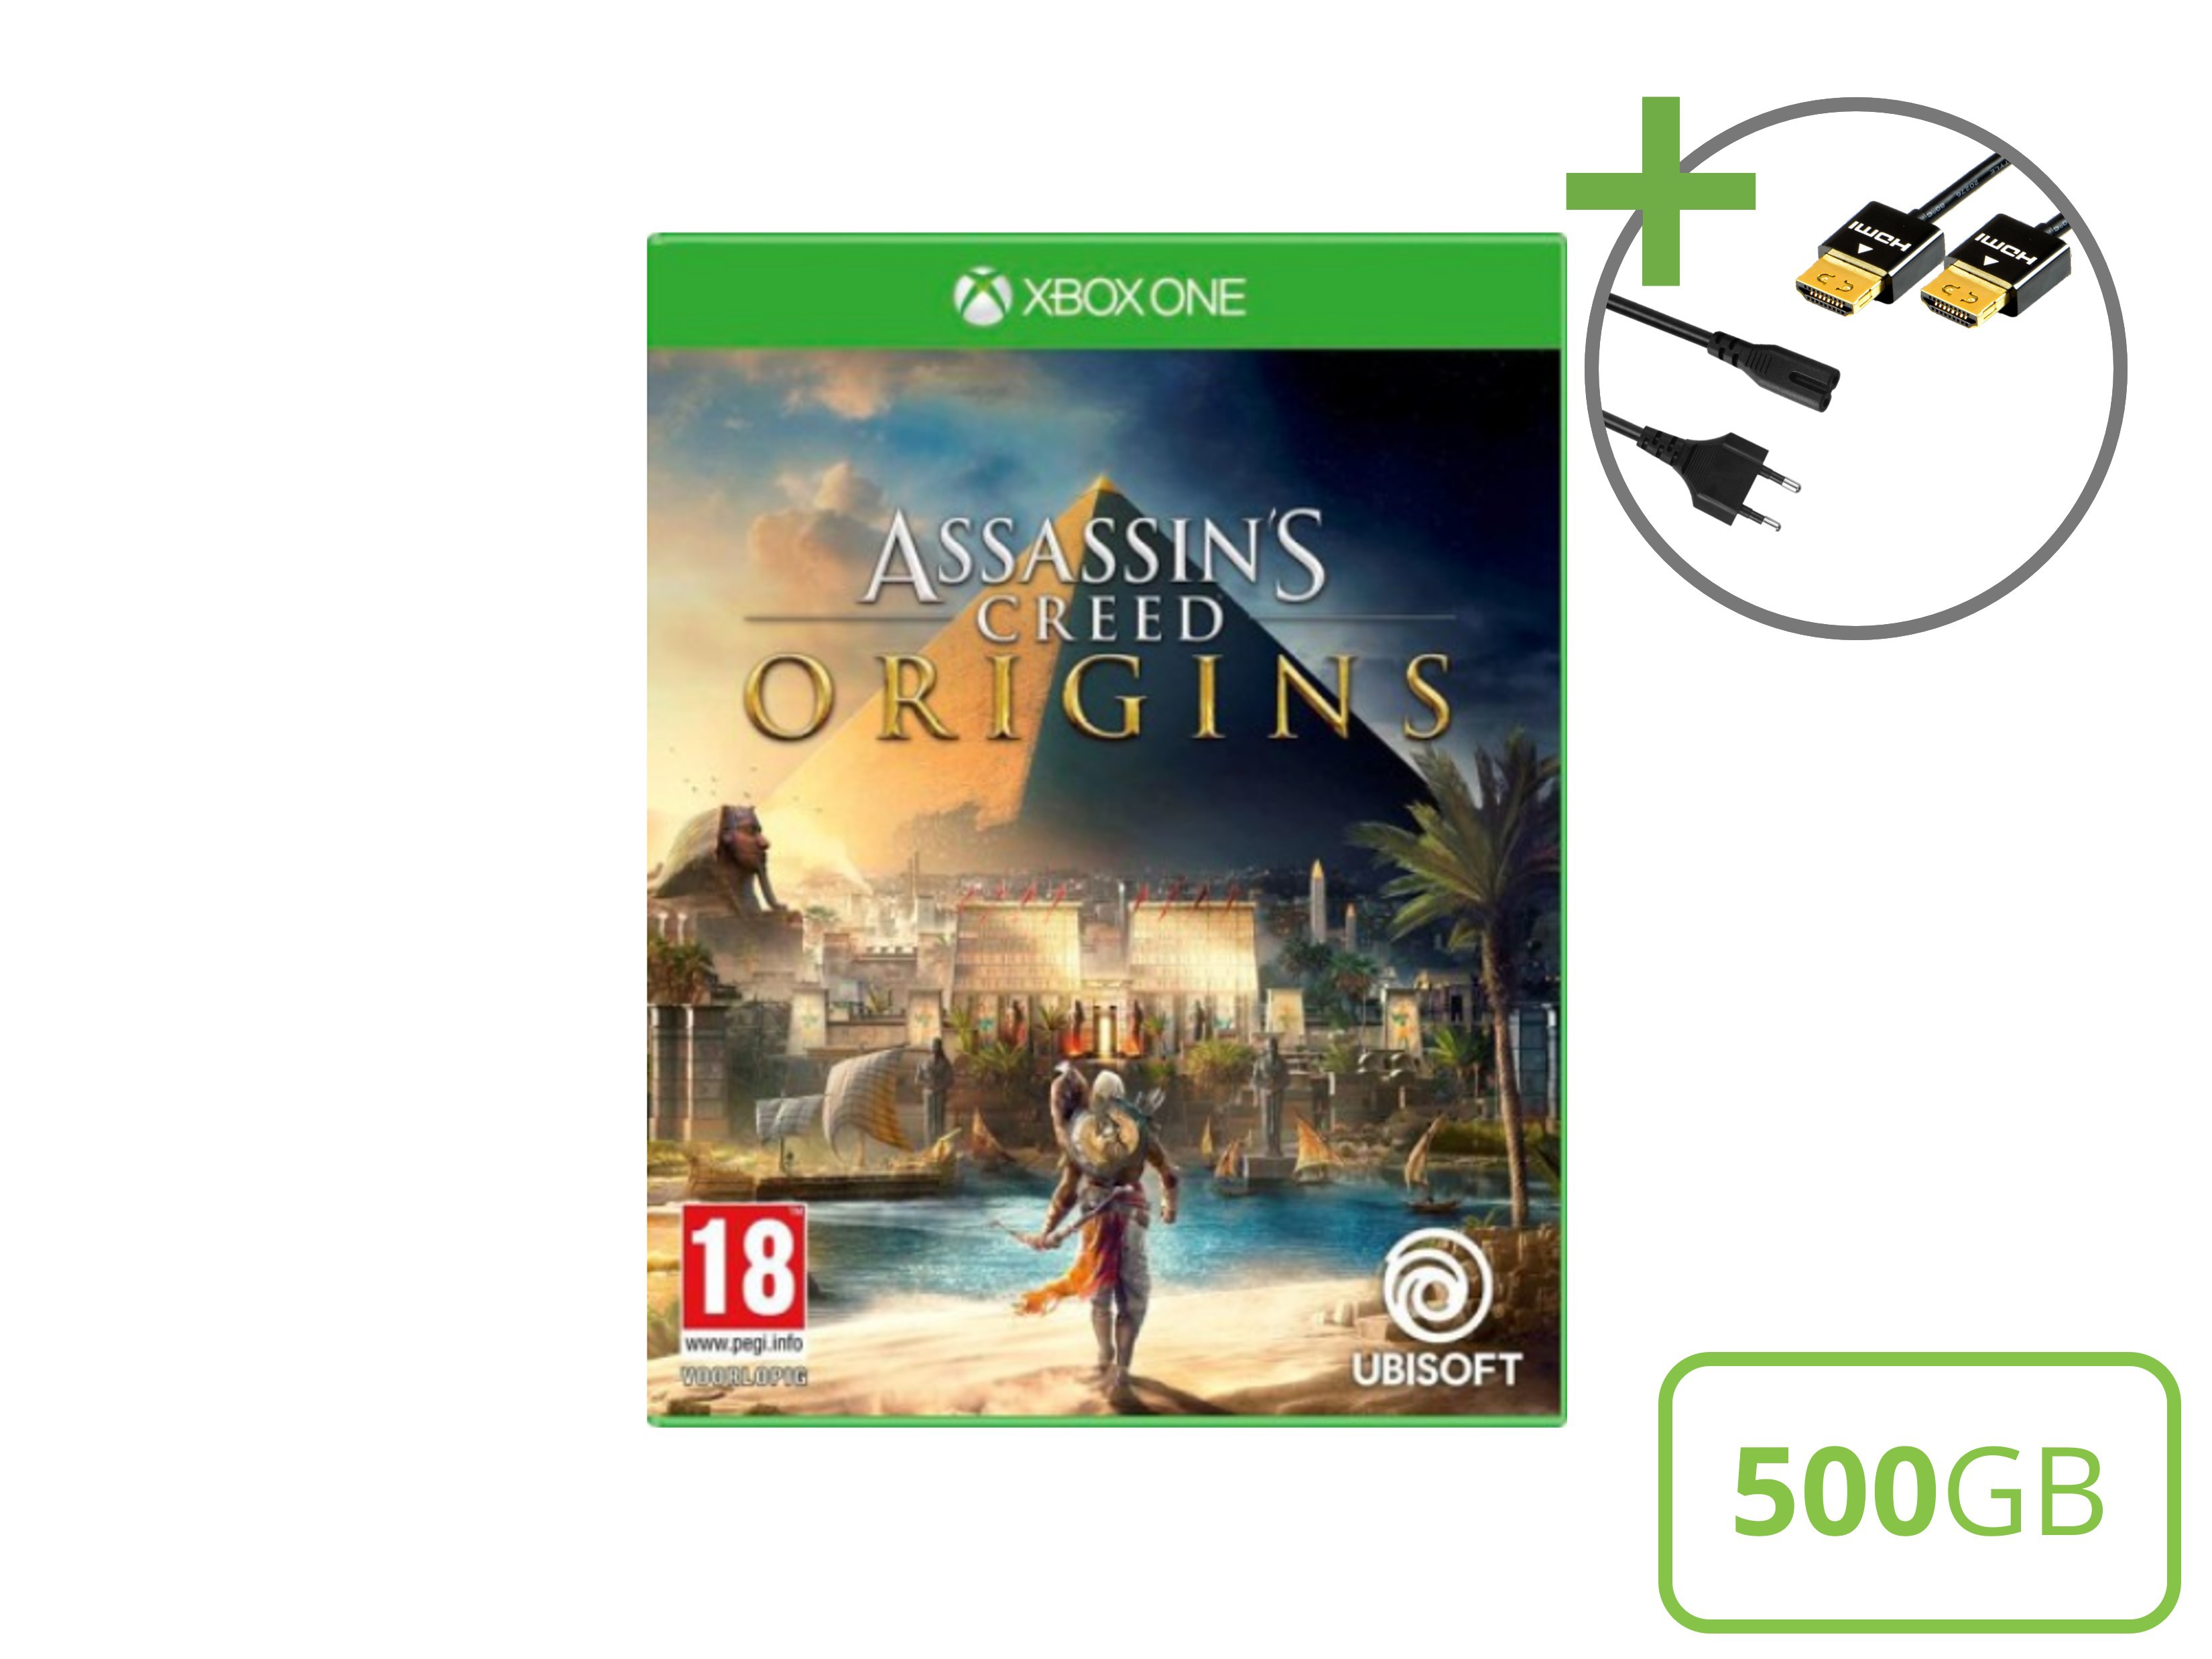 Microsoft Xbox One S Starter Pack - 500GB Assassin's Creed Origins Edition - Xbox One Hardware - 4